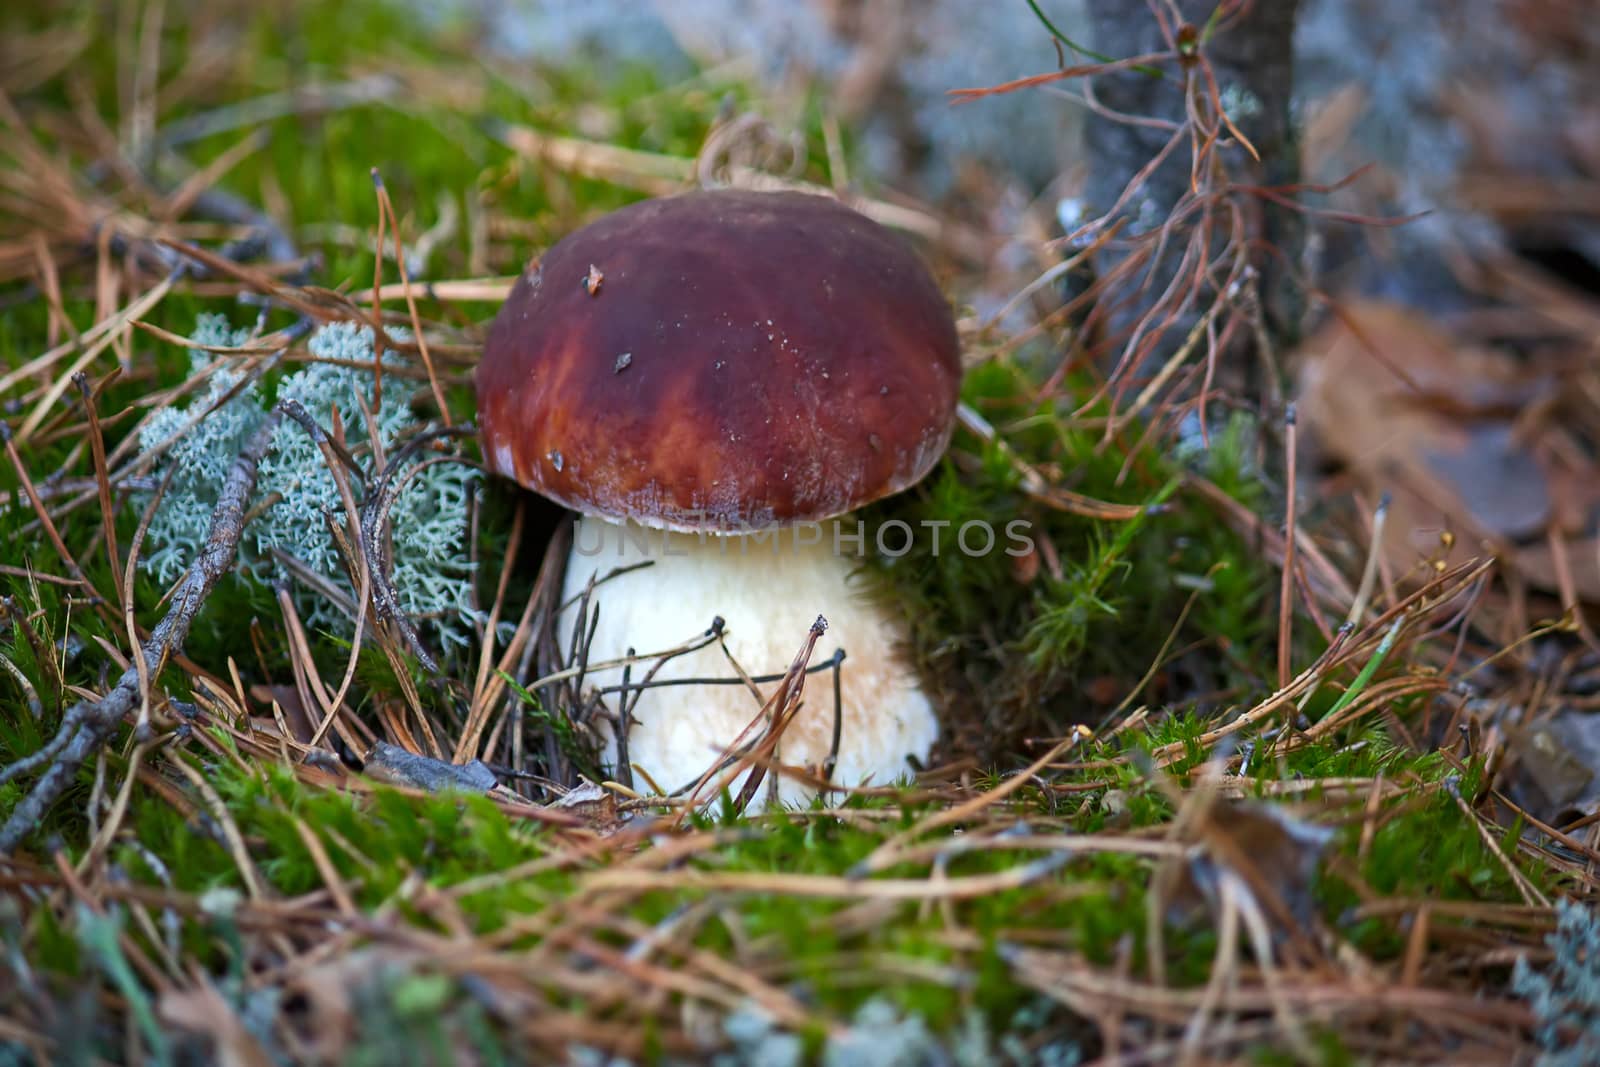 Mushroom in woods. Image with shallow depth of field.